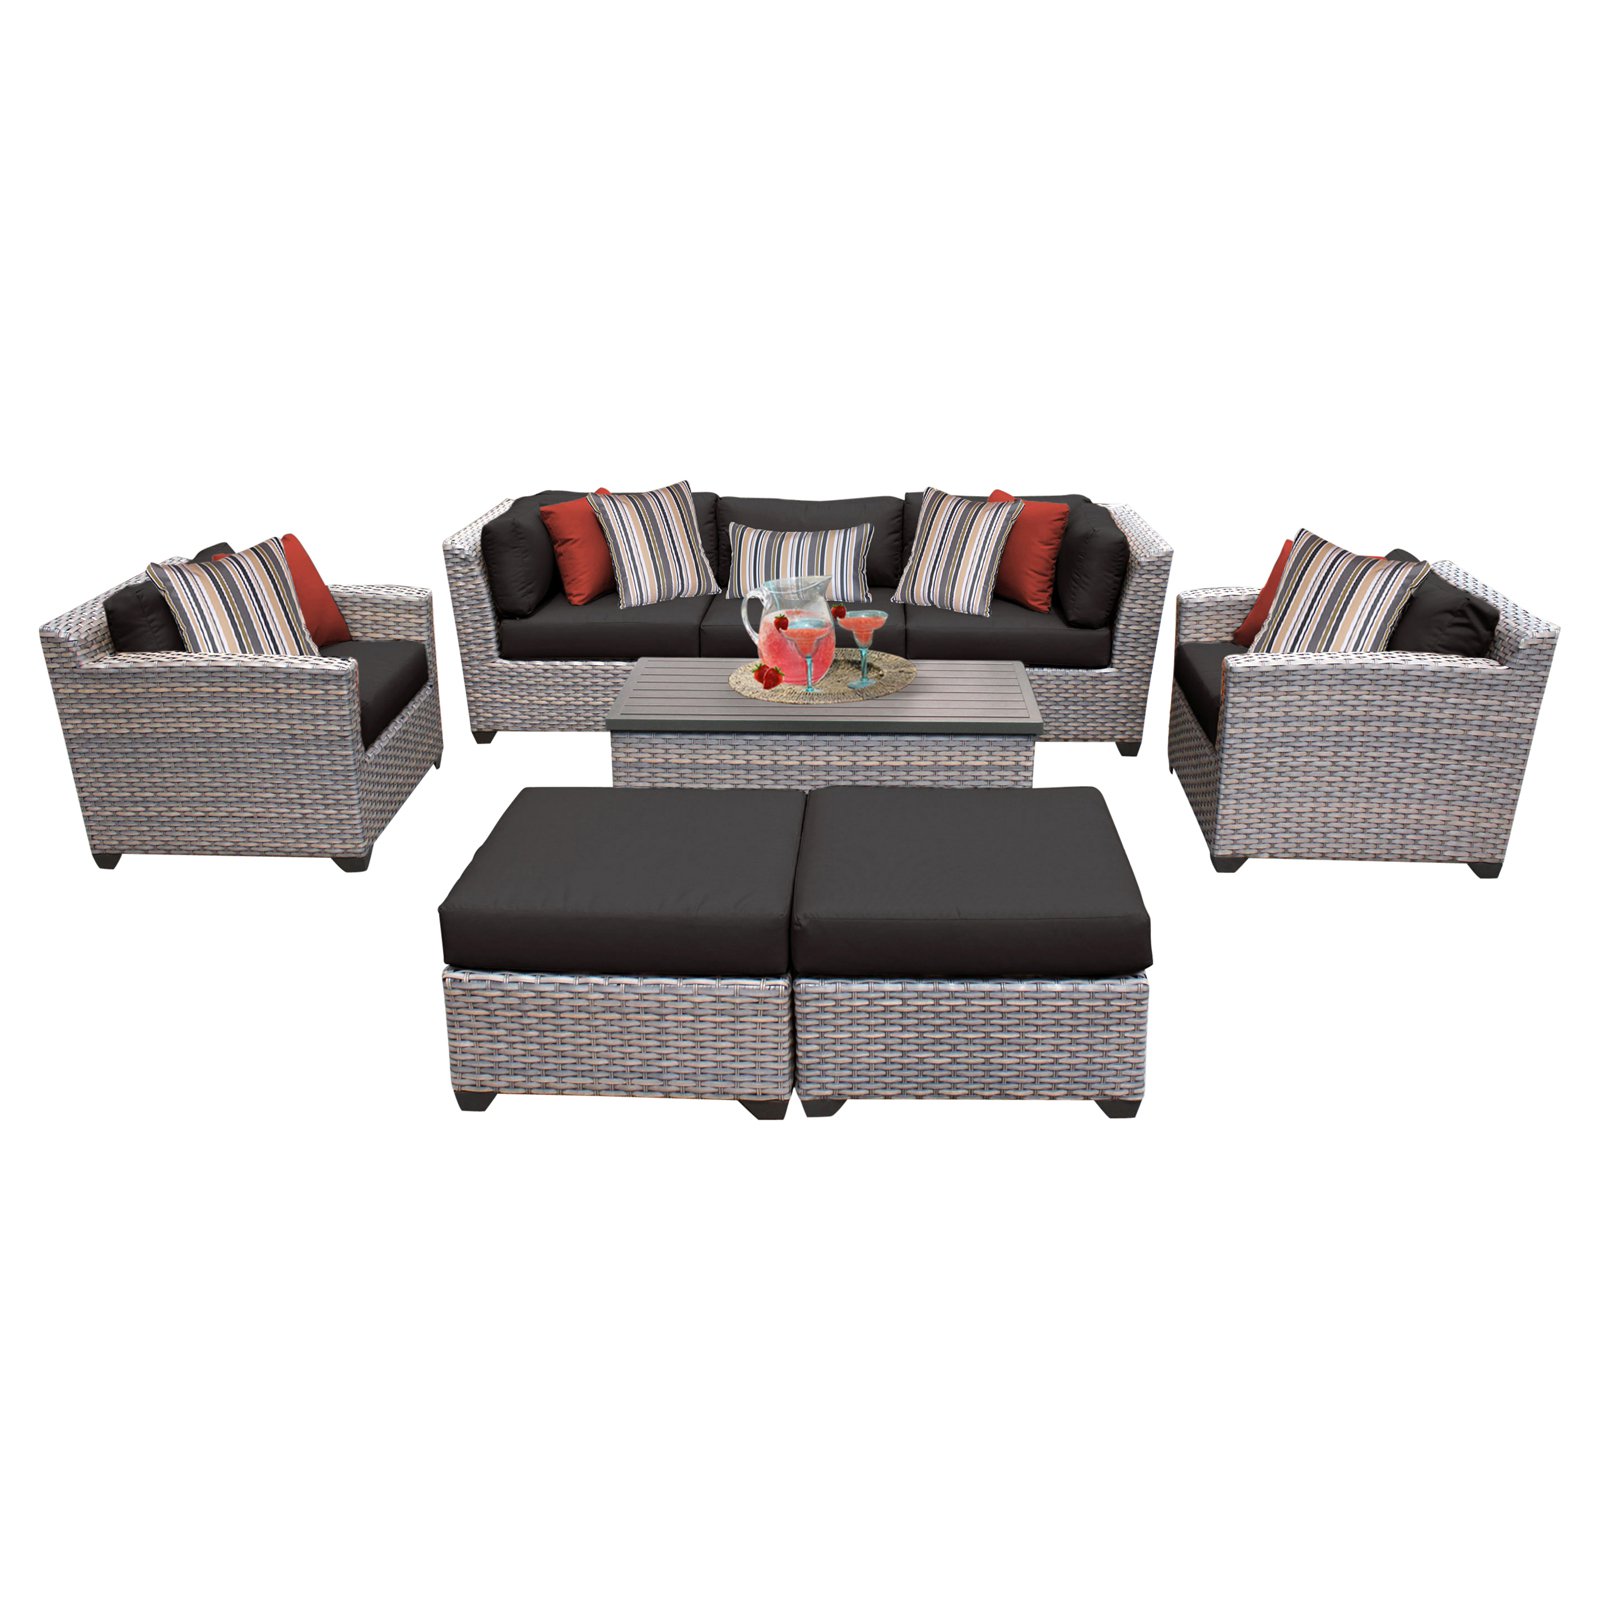 TK Classics Florence Wicker 8 Piece Patio Conversation Set with Ottoman and 2 Sets of Cushion Covers - image 1 of 2